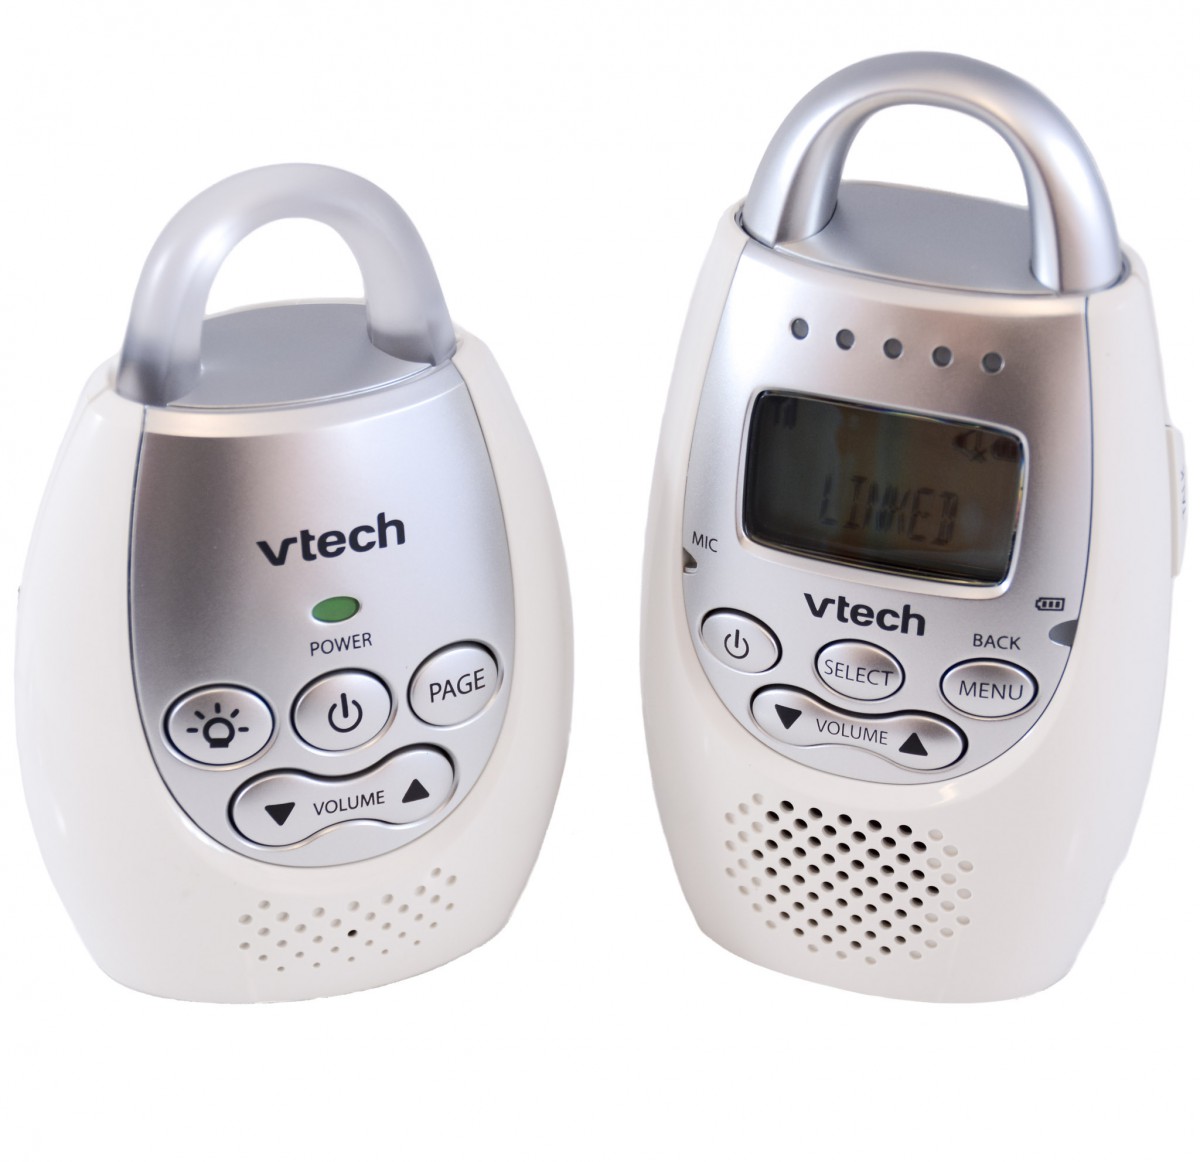 VTech DM111 Audio Baby Monitor W/ up to 1,000 ft of Range 5-Level Sounds